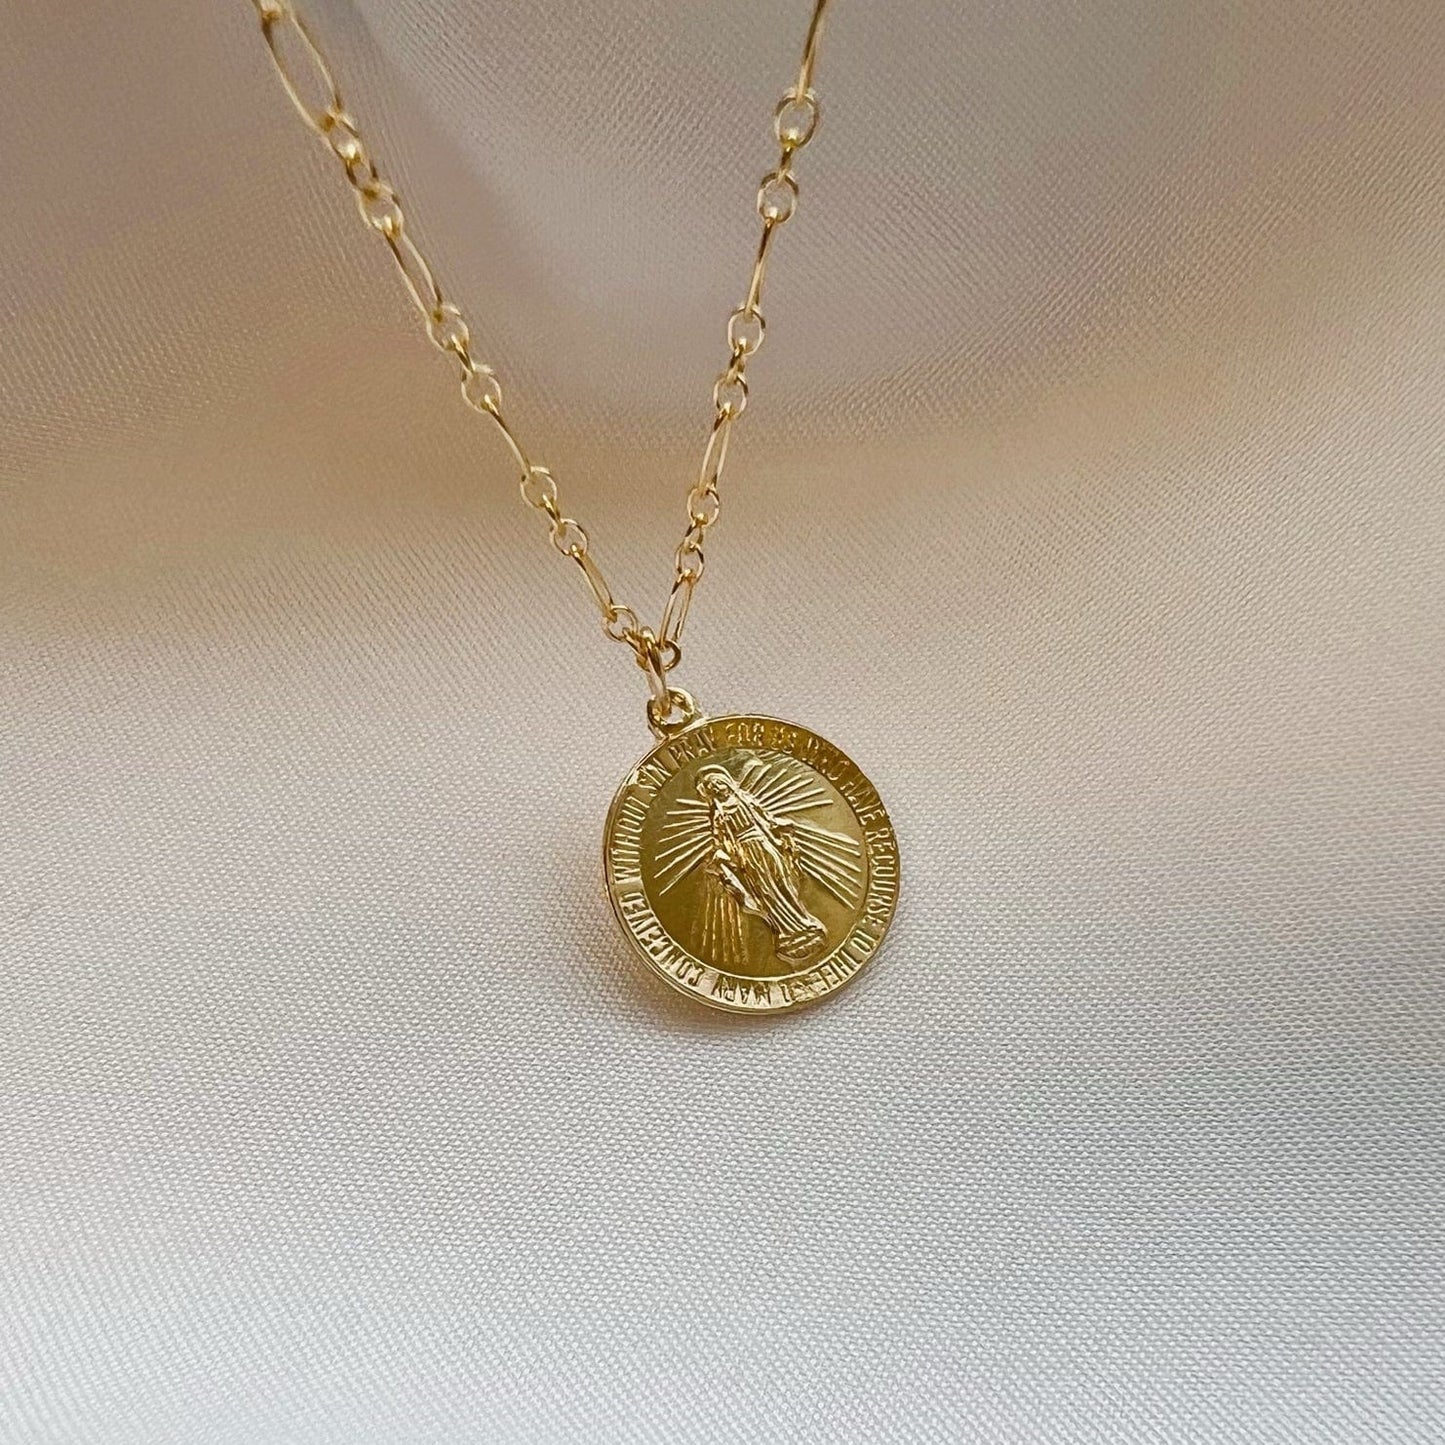 NKL-GF Our Lady Virgin Mary Necklace Gold Filled